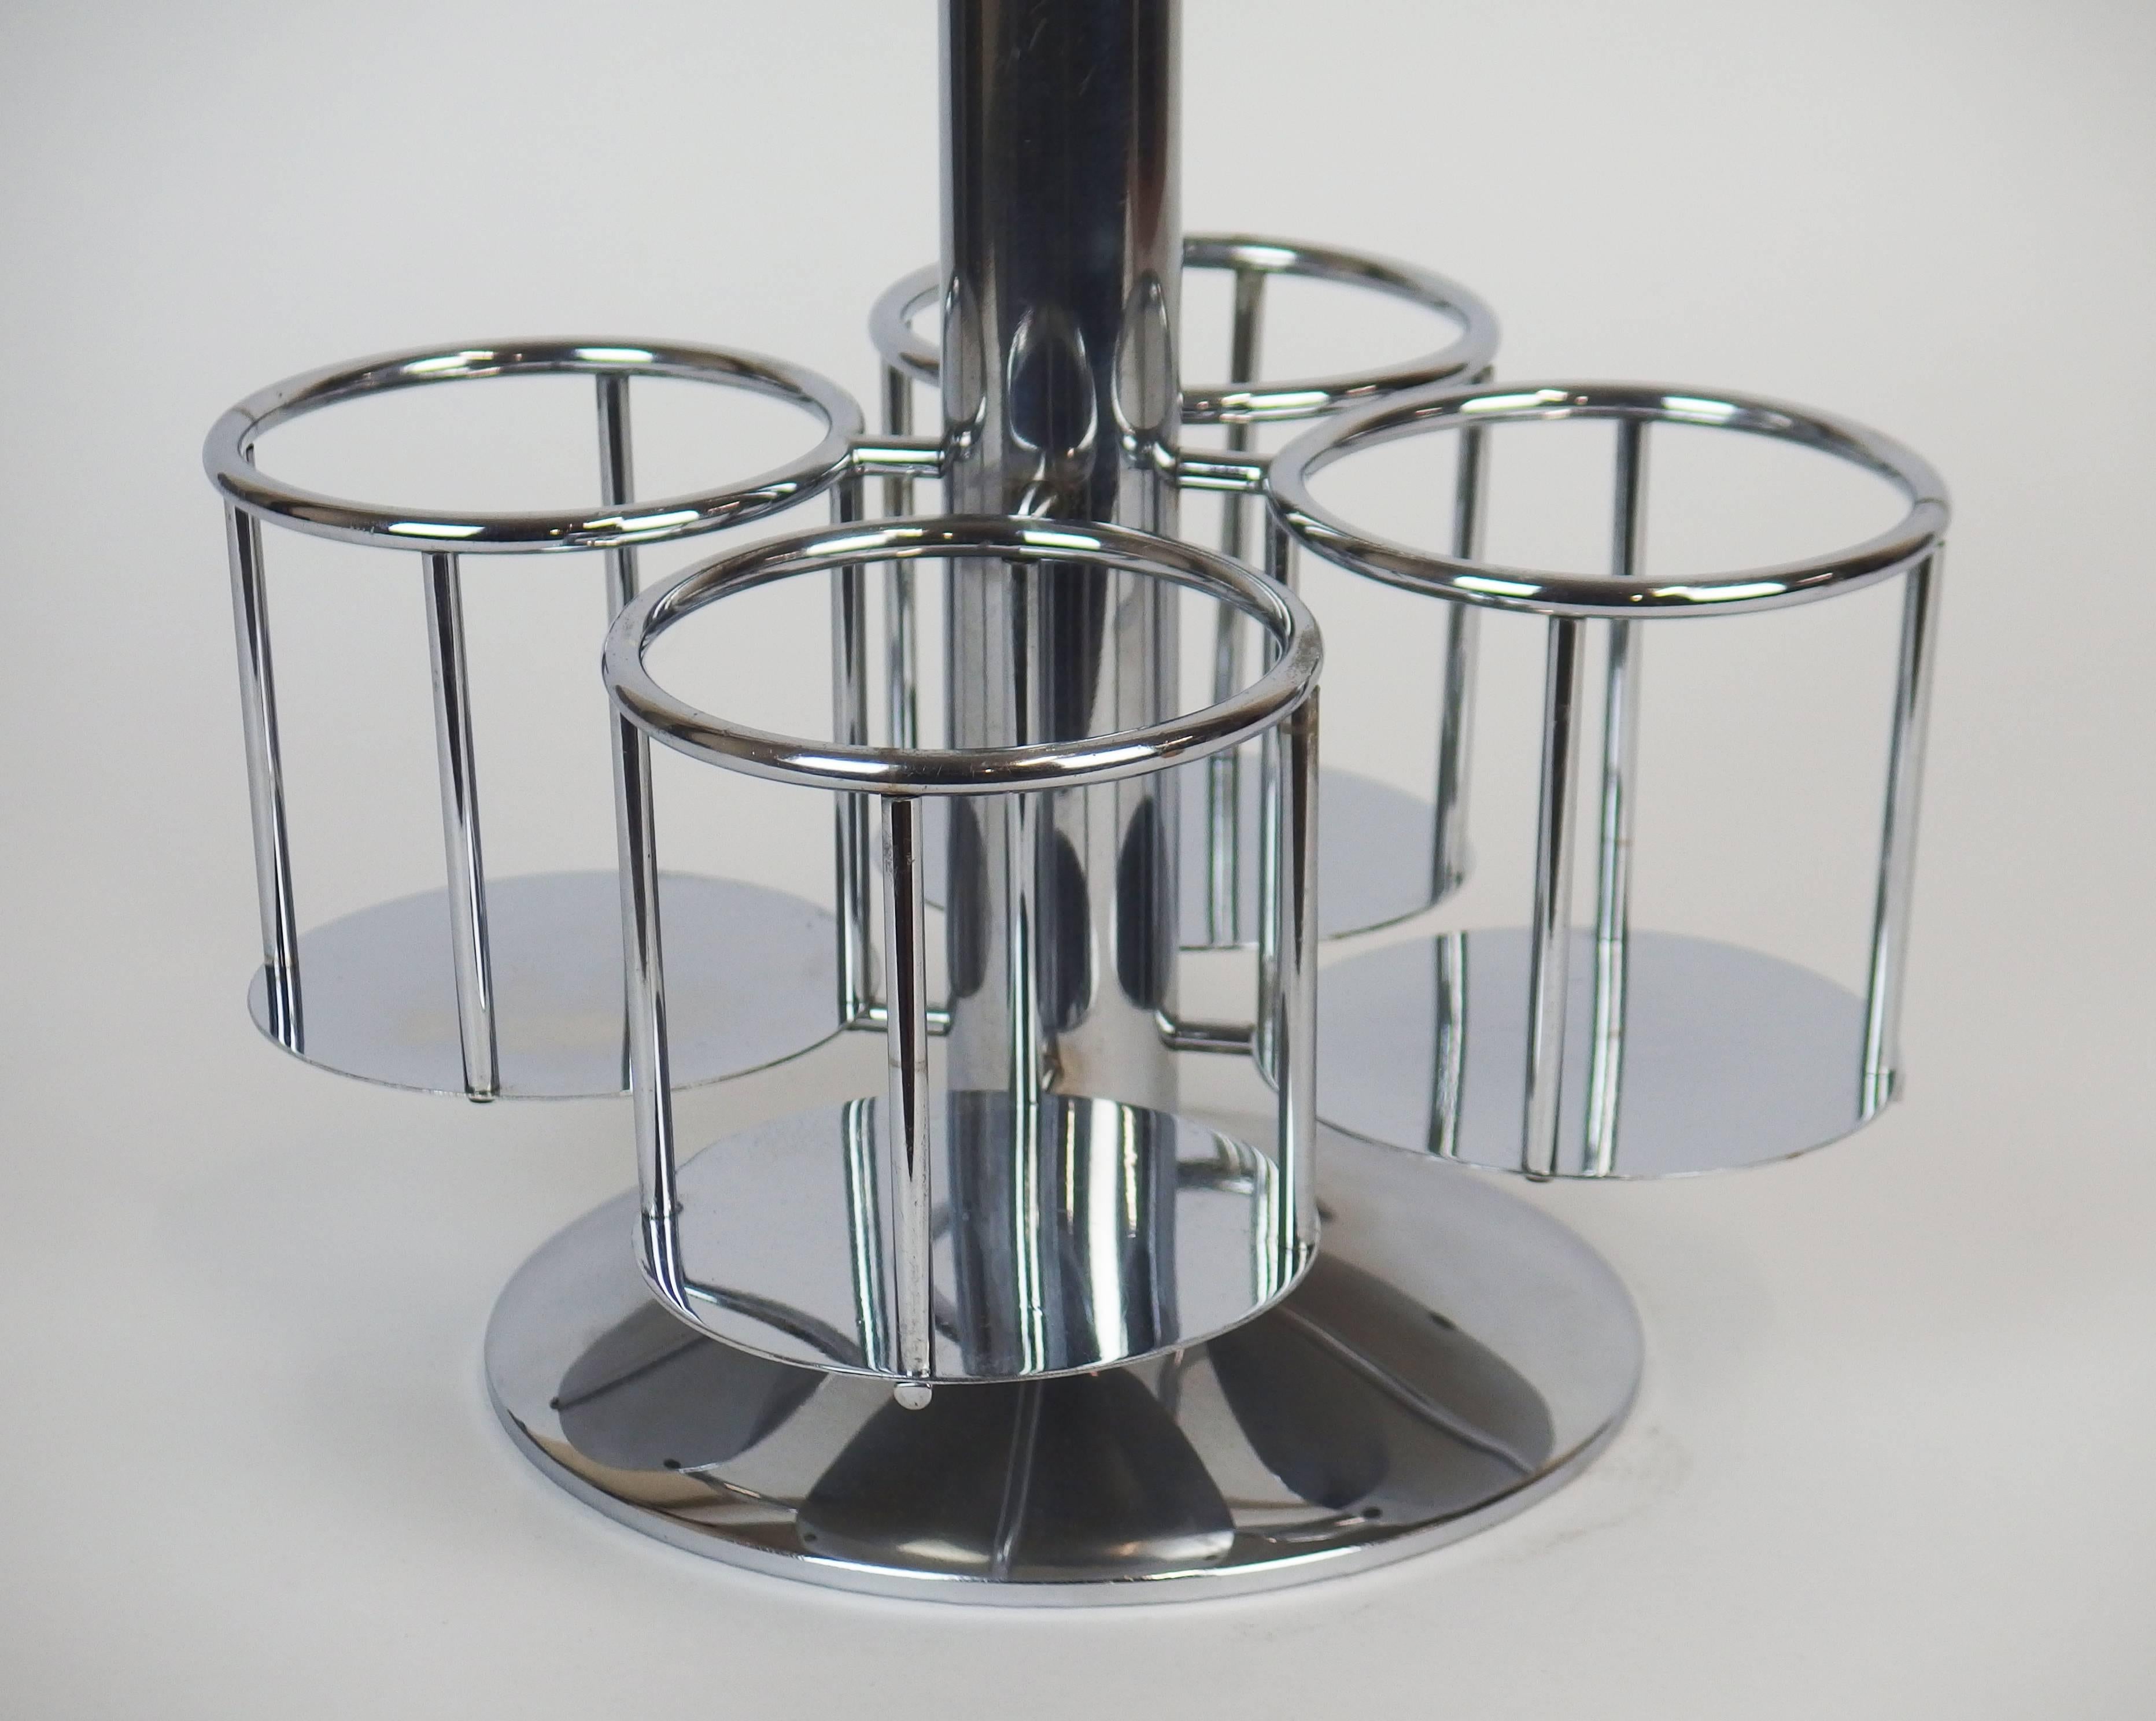 Art Deco Modernist Bottle Holder in the Style of Jacques Adnet For Sale 1